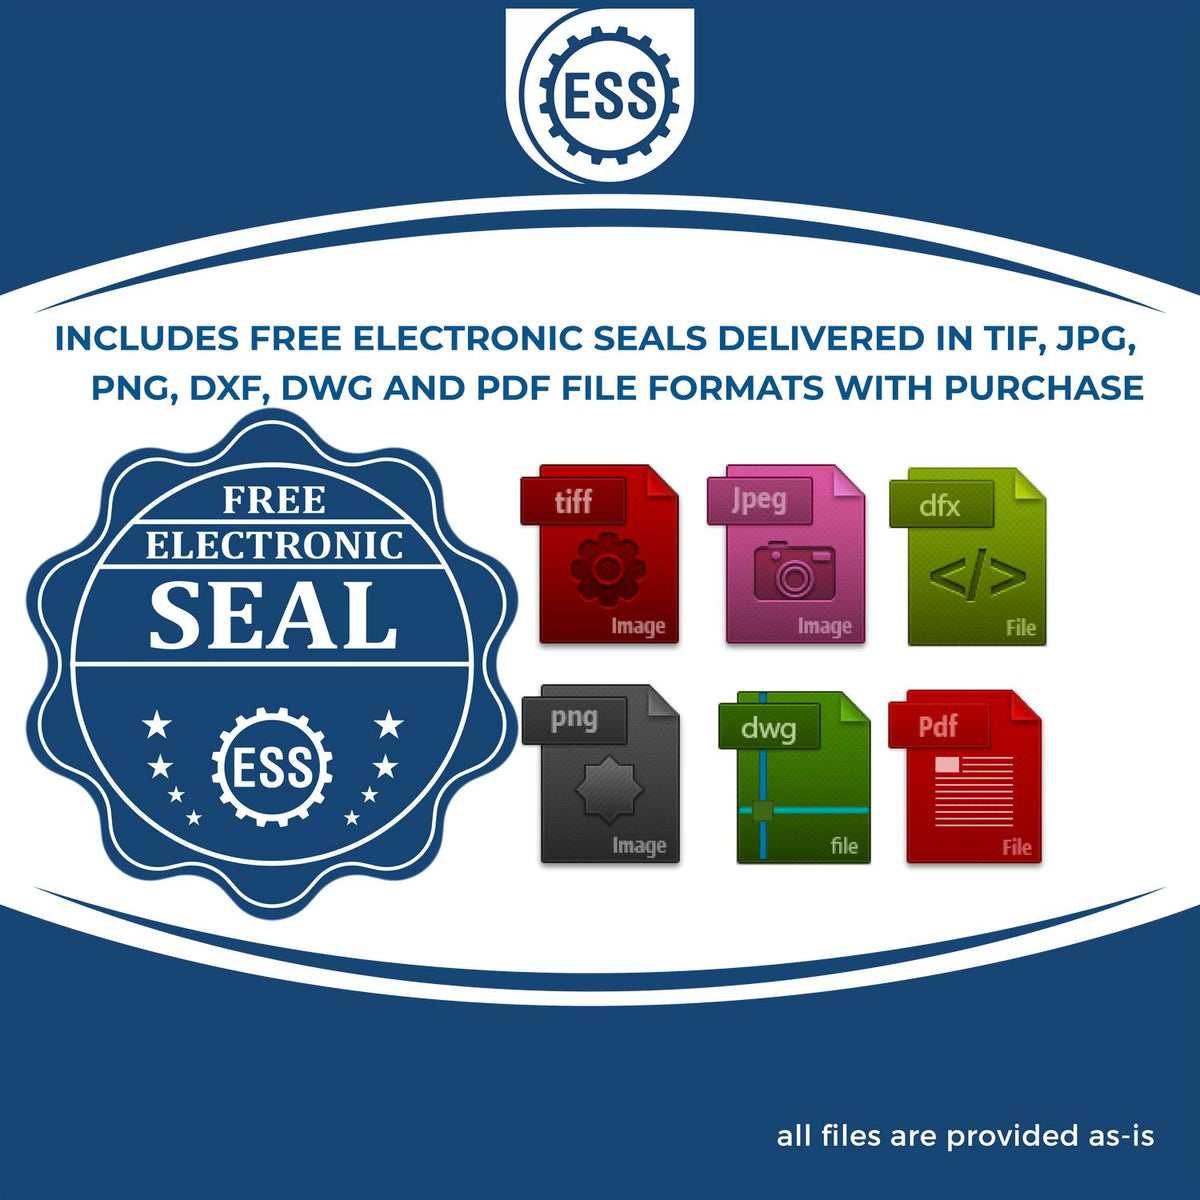 An infographic for the free electronic seal for the Heavy Duty Cast Iron Rhode Island Architect Embosser illustrating the different file type icons such as DXF, DWG, TIF, JPG and PNG.